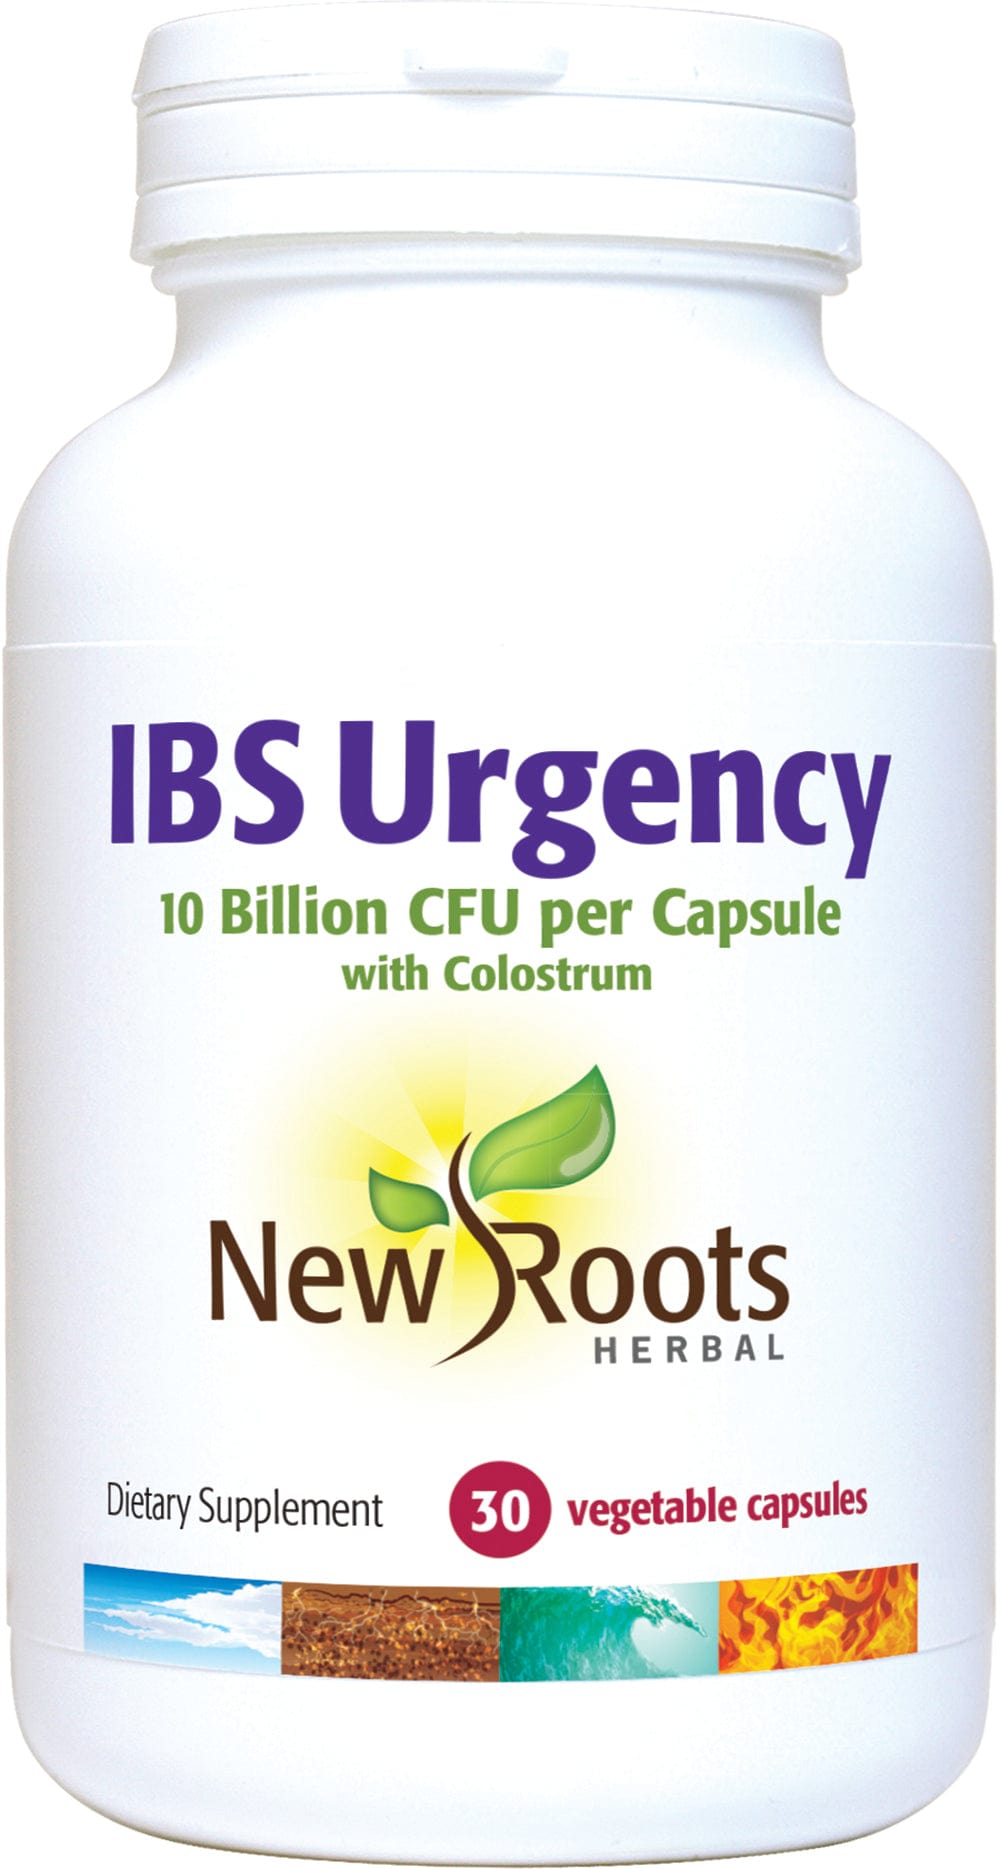 NEW ROOTS HERBAL Suppléments IBS Urgency (10 milliards+ 5 souches syndrome du côlon irritable) 30vcaps